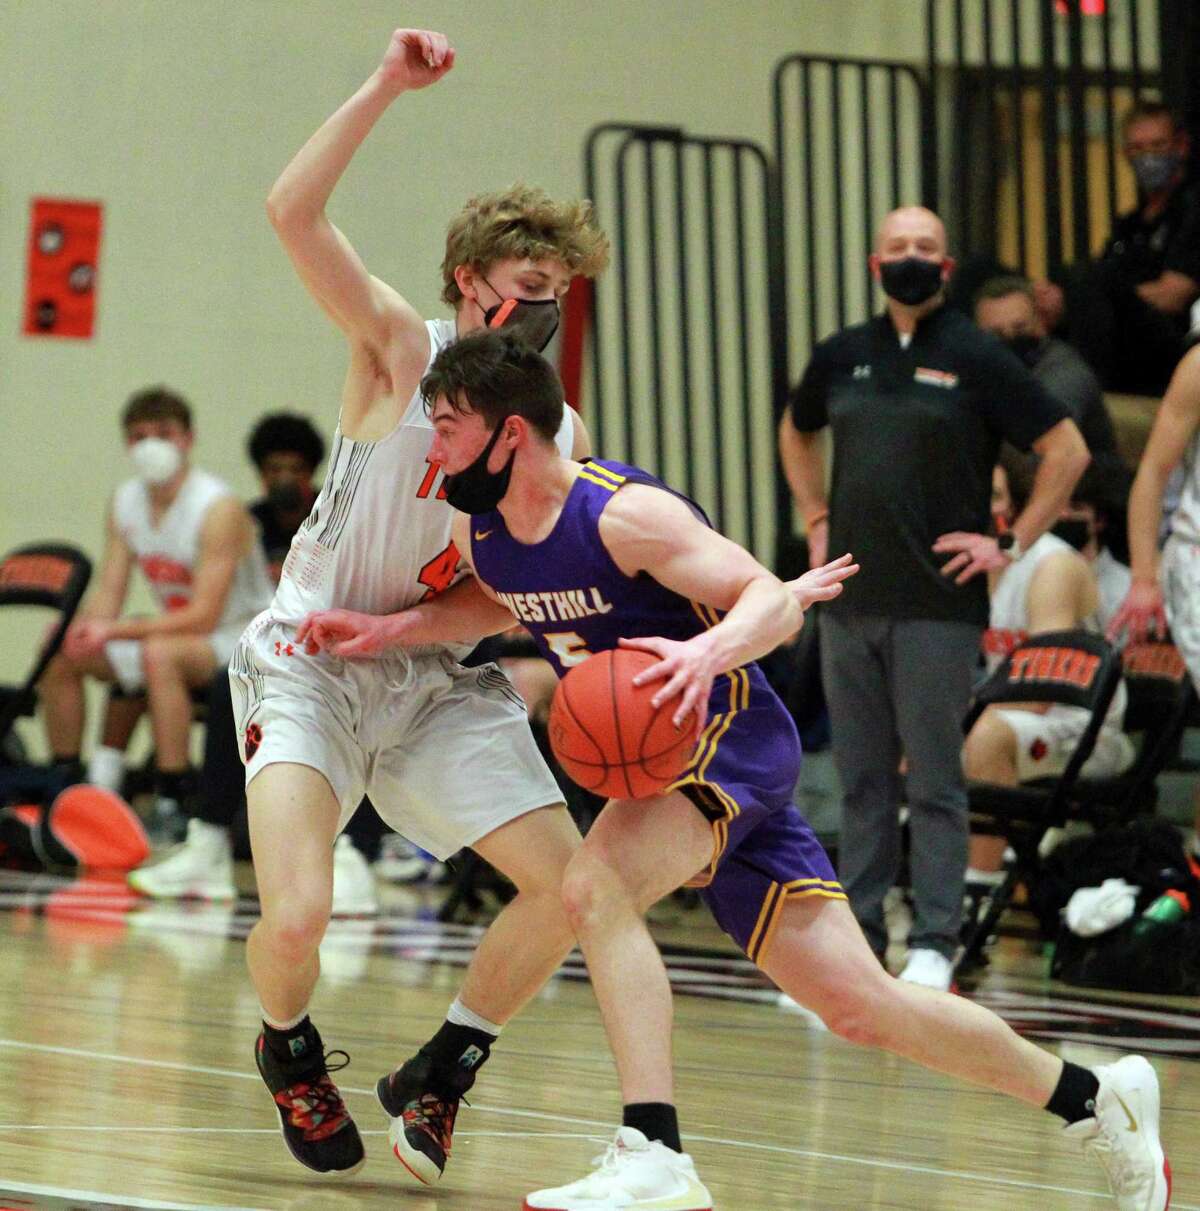 Westhill's Benjamin Pennella (5) breaks past Ridgefield's Alister Walsh (4) during FCIAC championship boys basketball game action in Ridgefield, Conn., on Friday March 27, 2021.